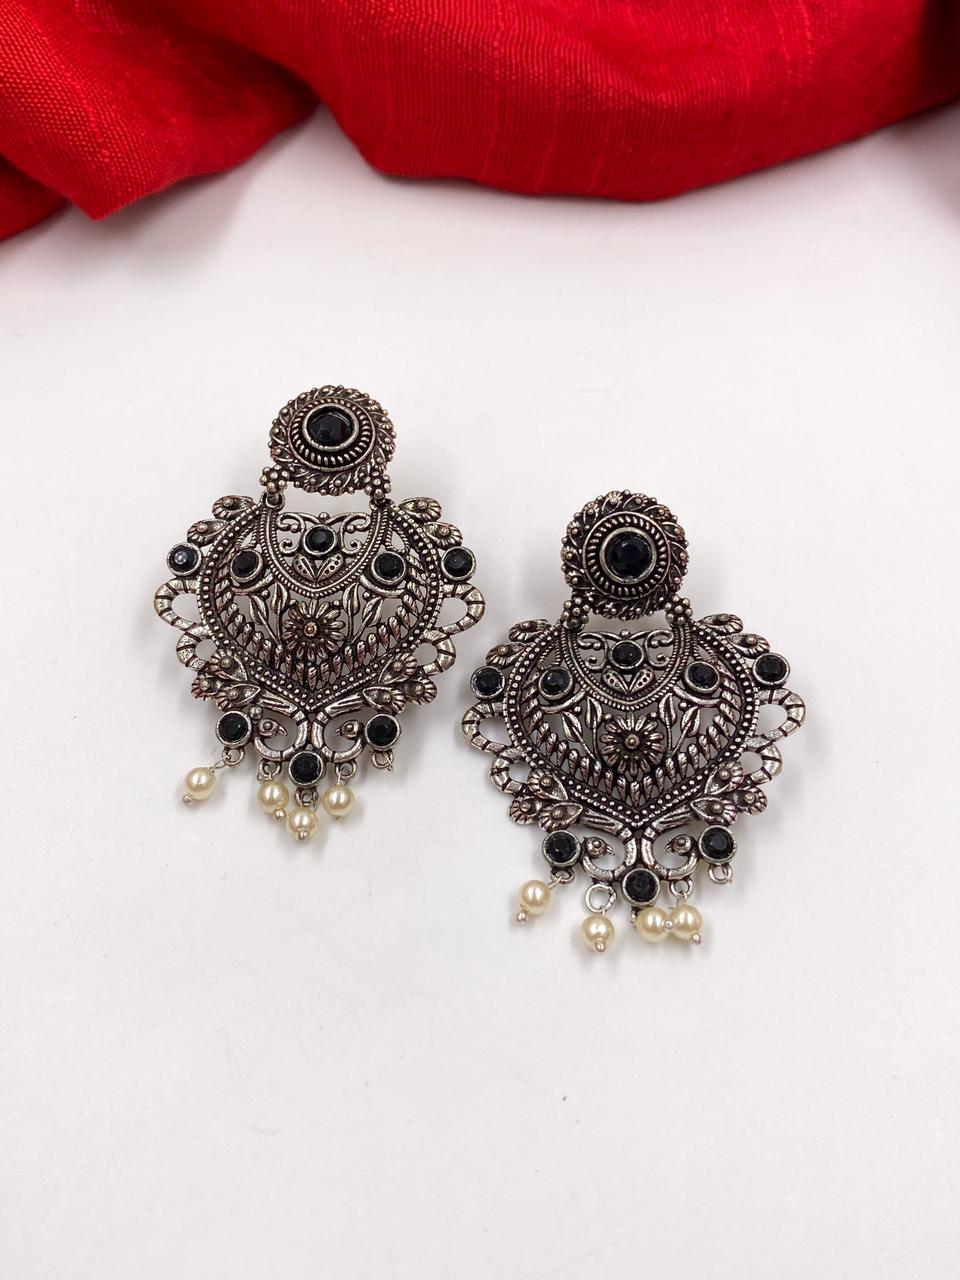 Attractive silver oxidized earrings